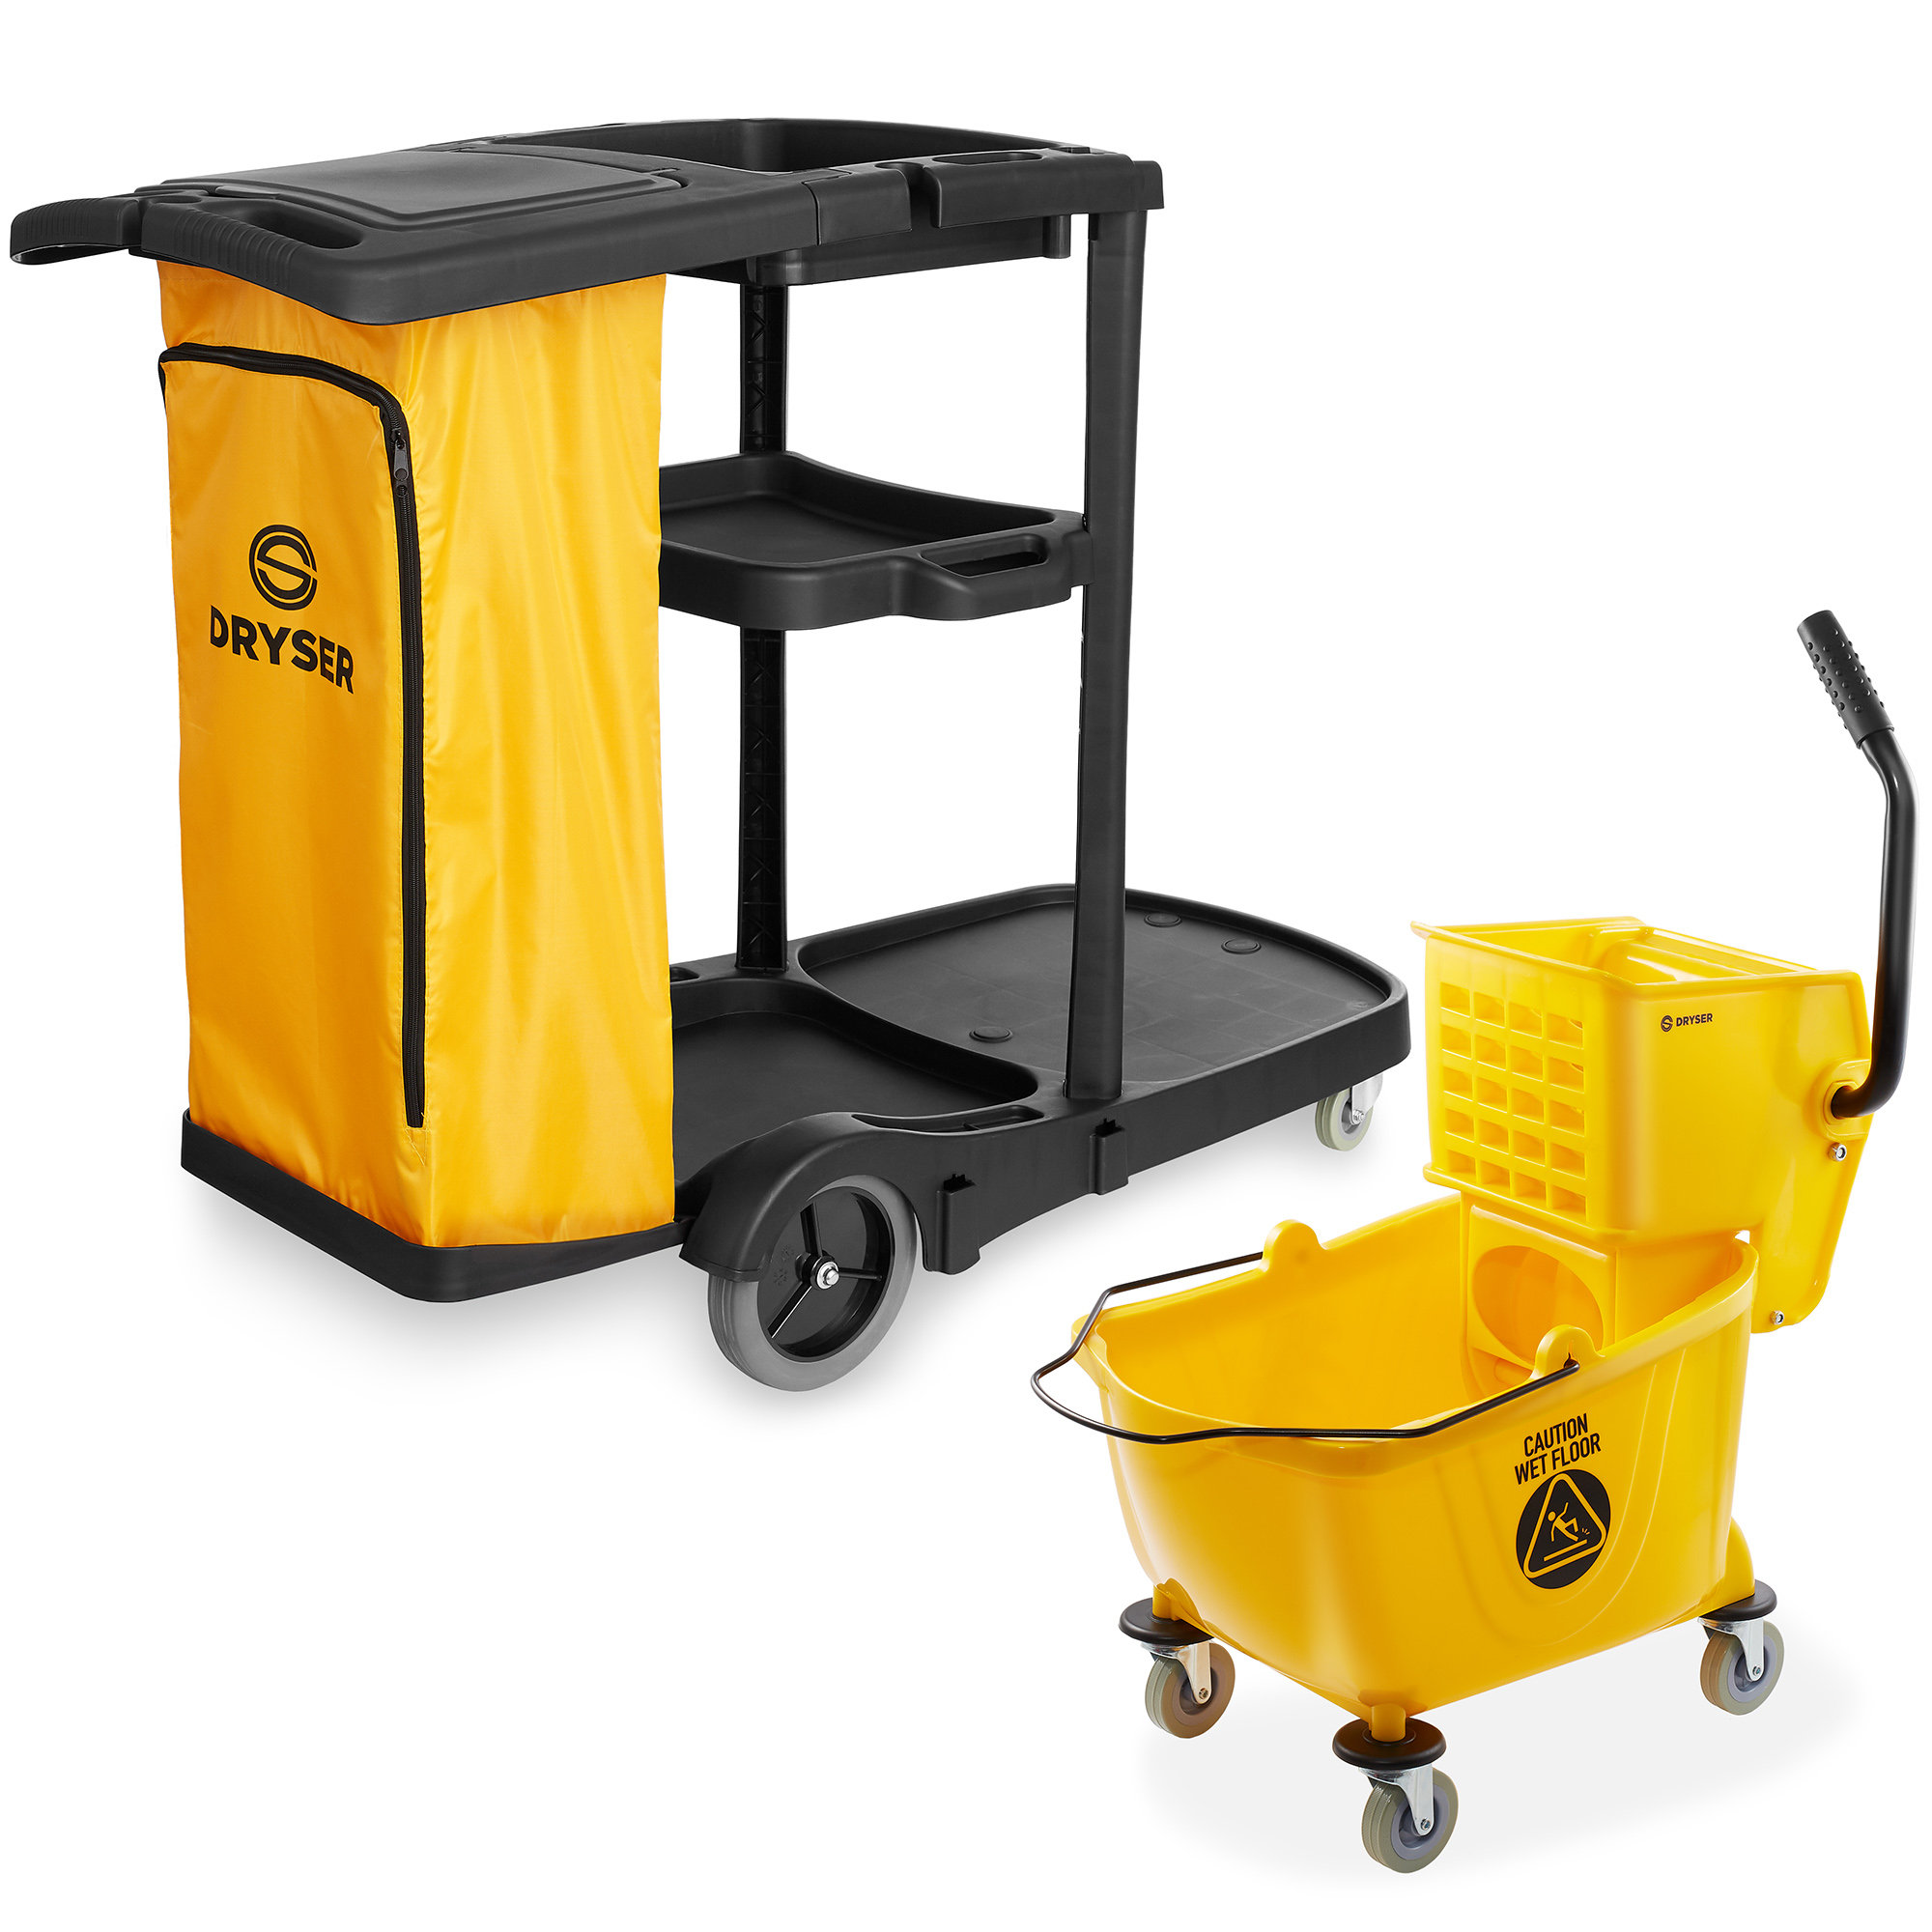 Shop Rubbermaid Commercial Products Rubbermaid Commercial Janitorial Cart  with Cleaning Accessories (Mop Bucket, Mop, Broom, Duster, & More) at